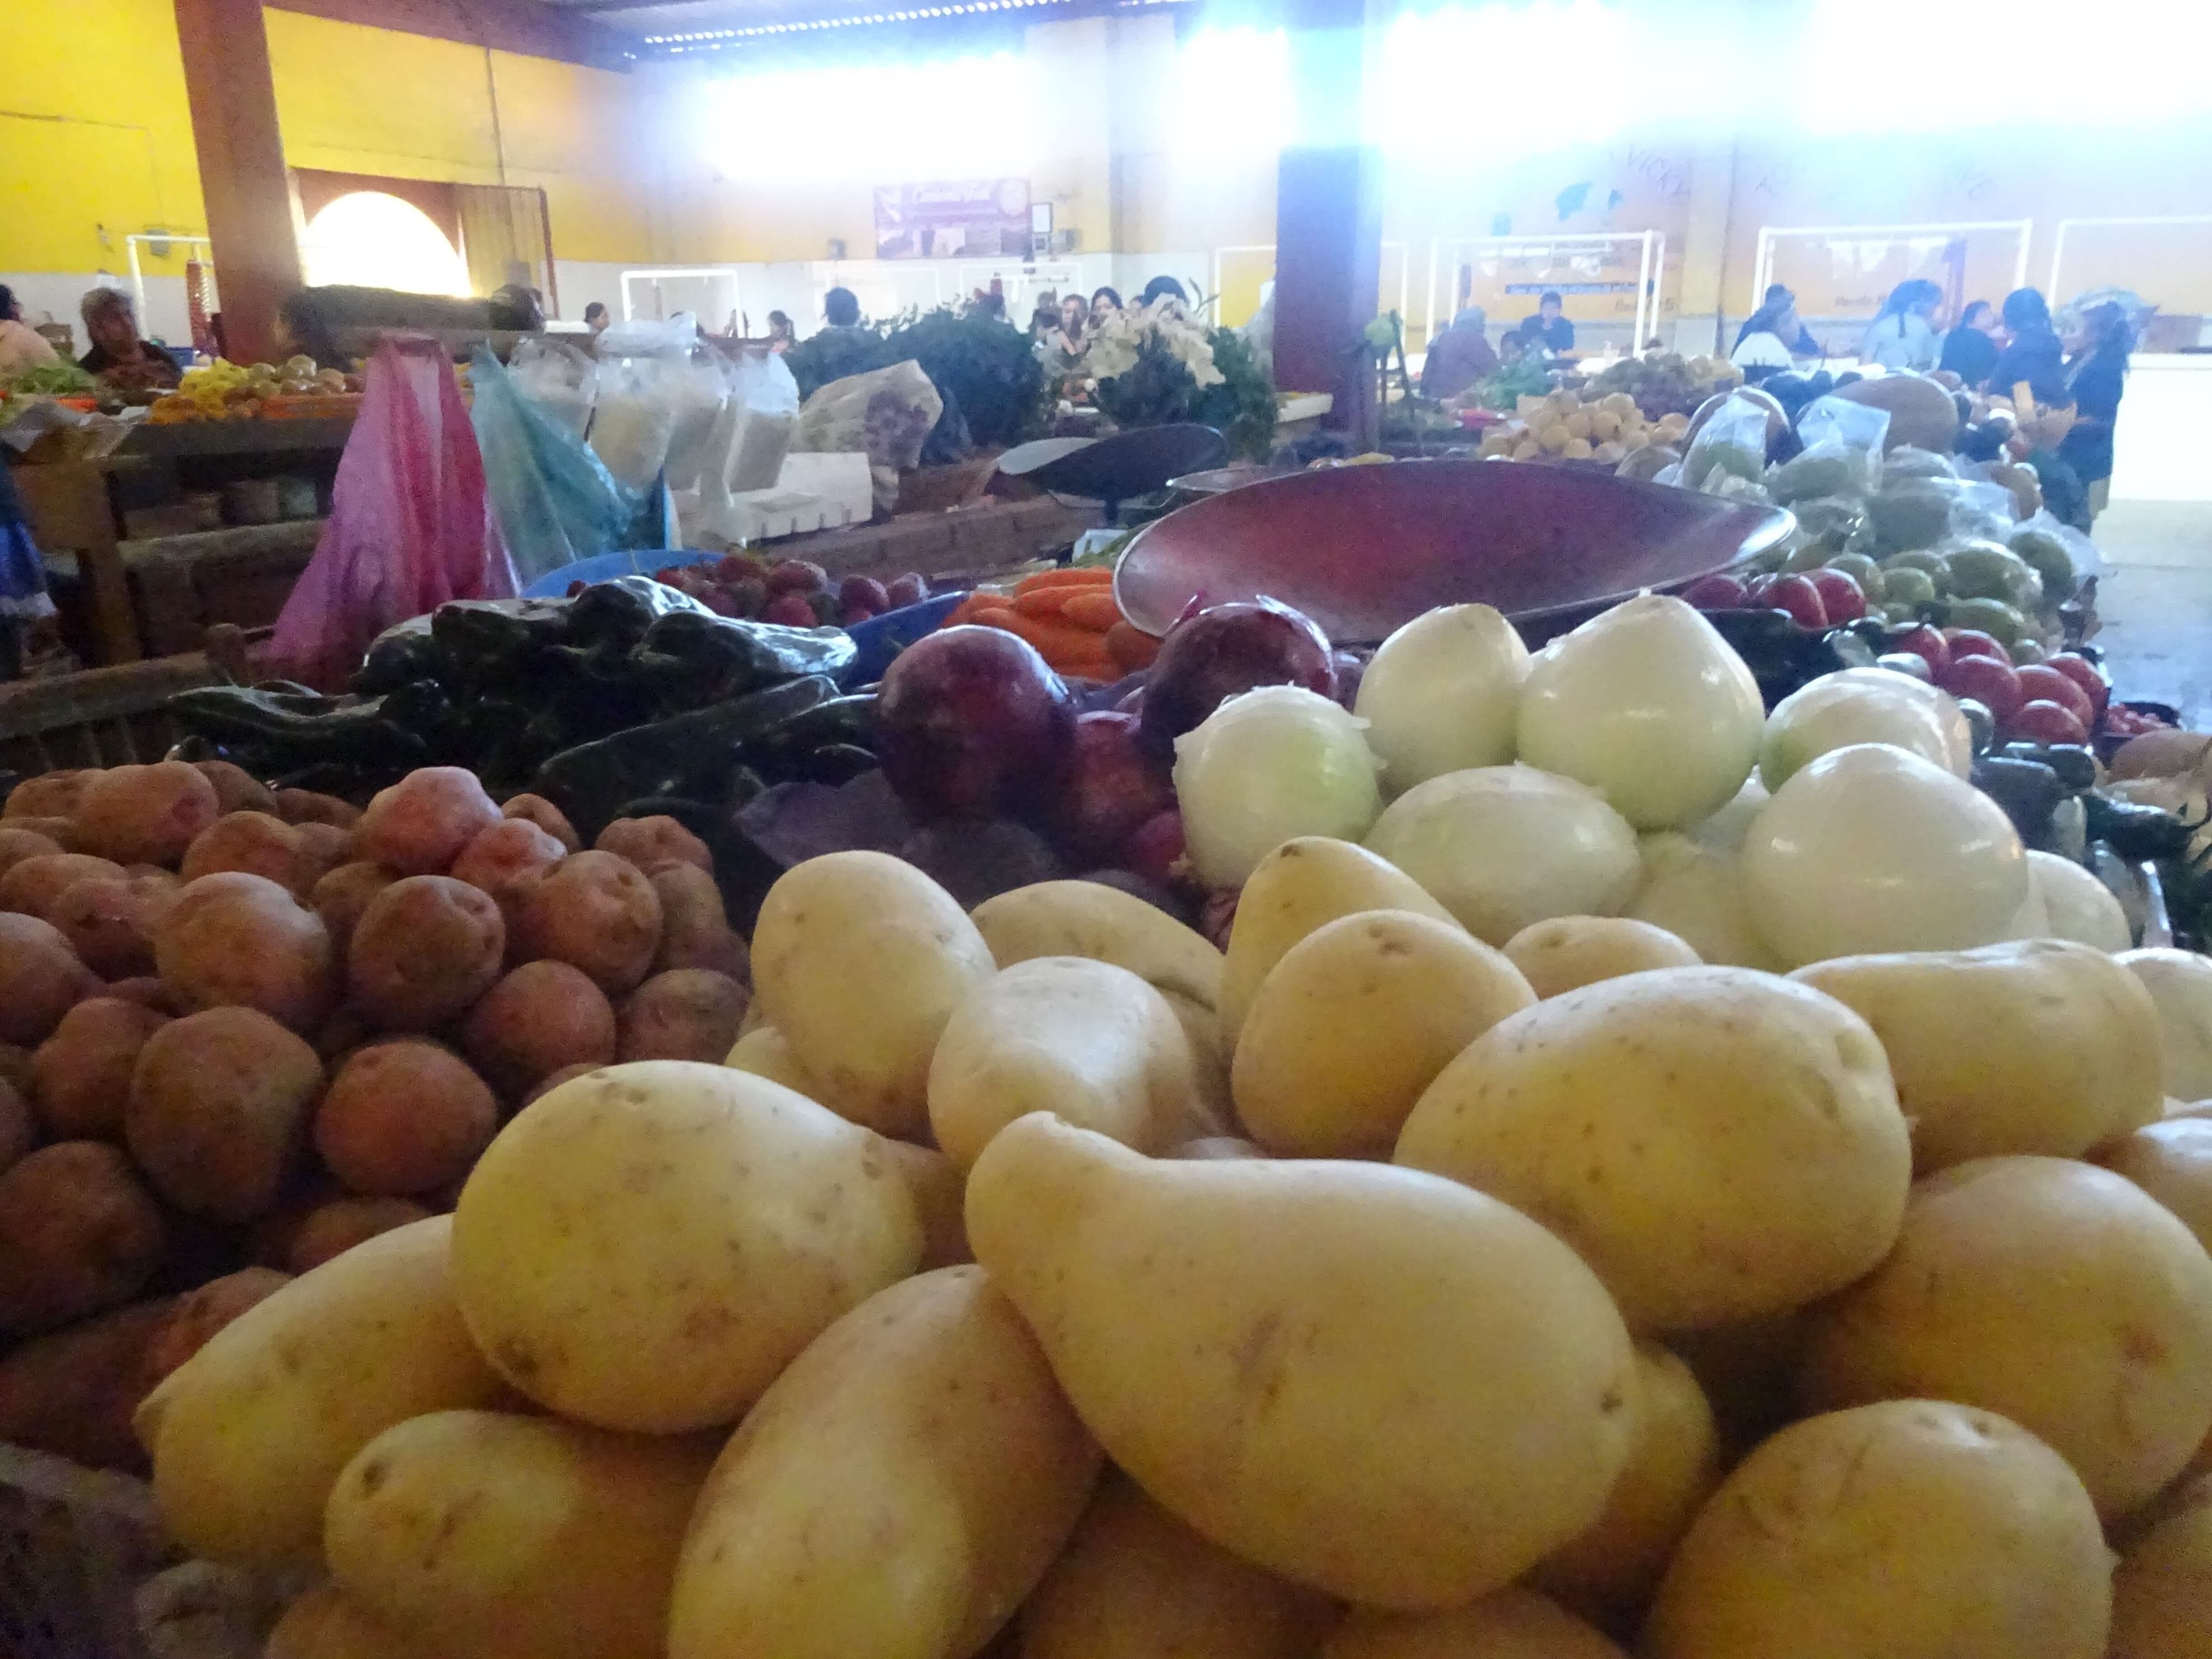 Some Produce in the Market